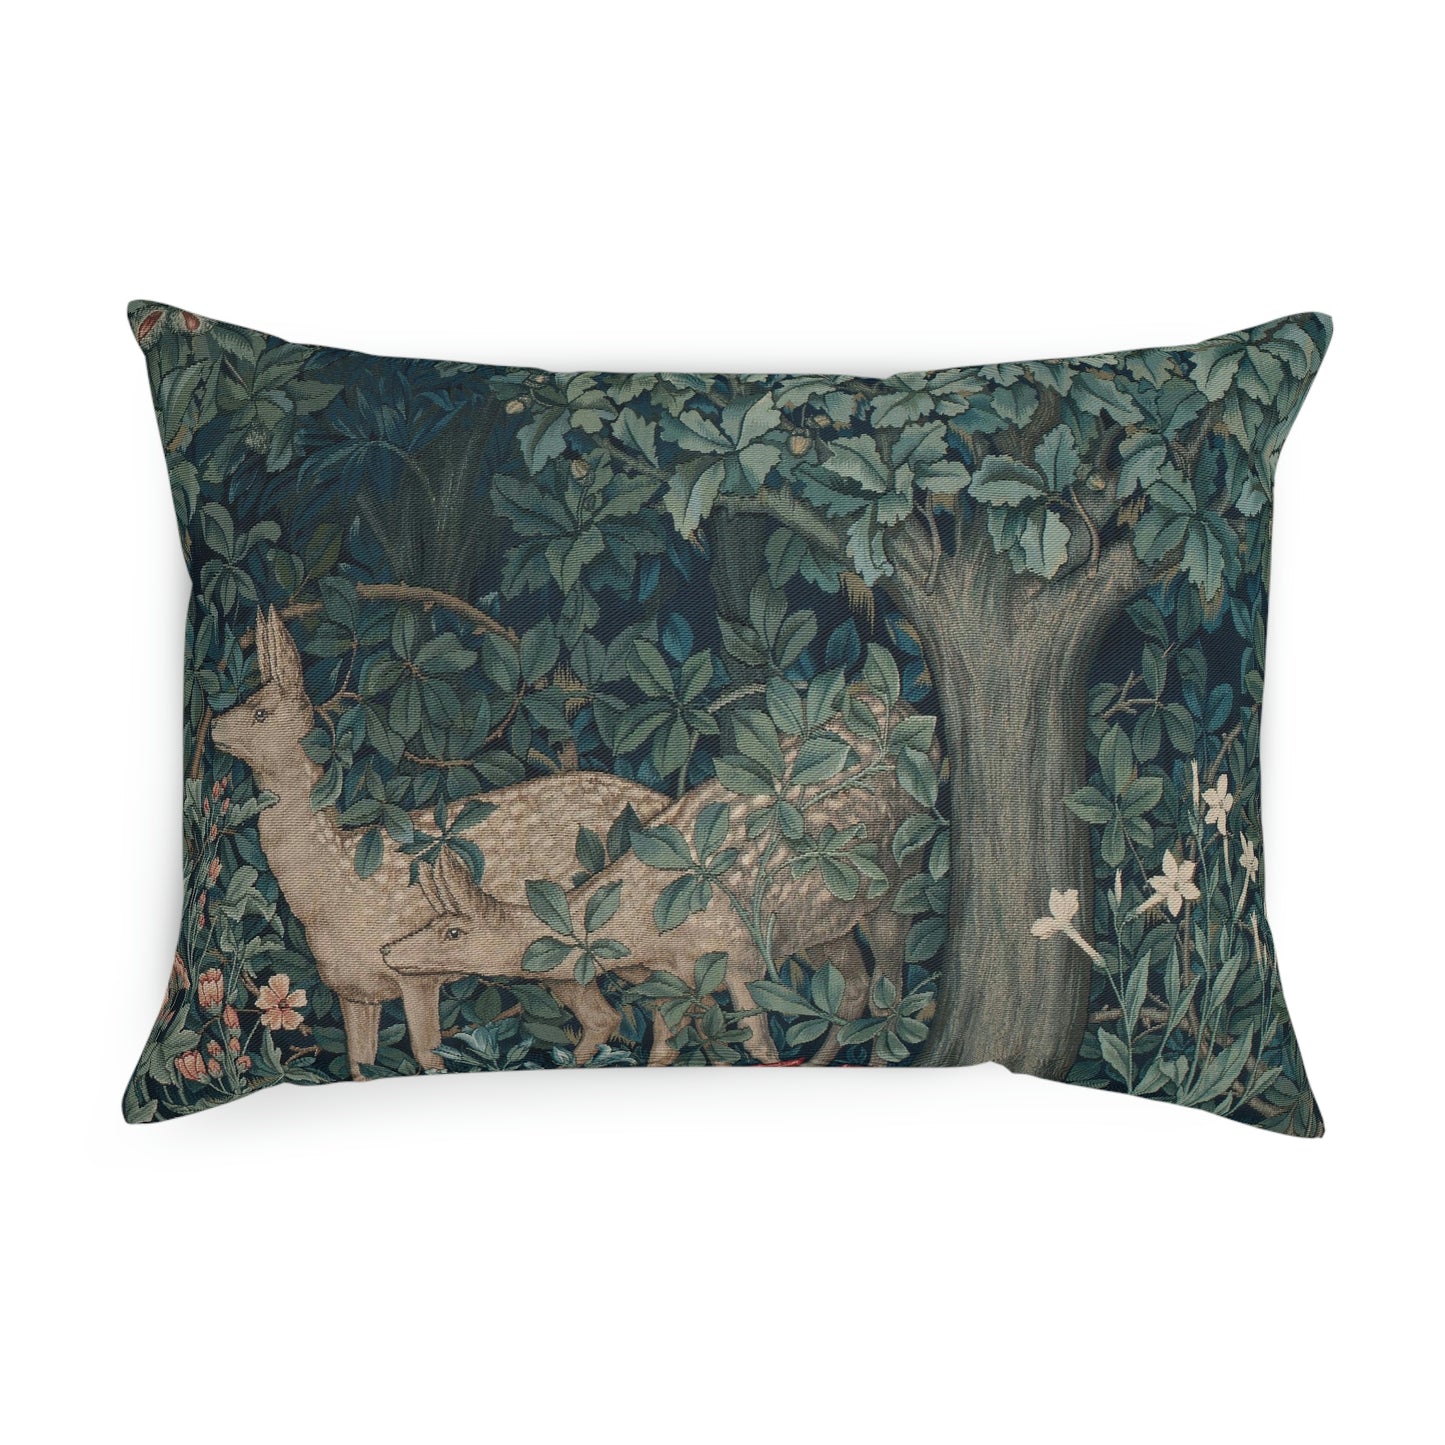 William-Morris-and-Co-Cushion-and-Cushion-Cover-Dear-by-John-Henry-Dearle-Green-Forest-Collection-12